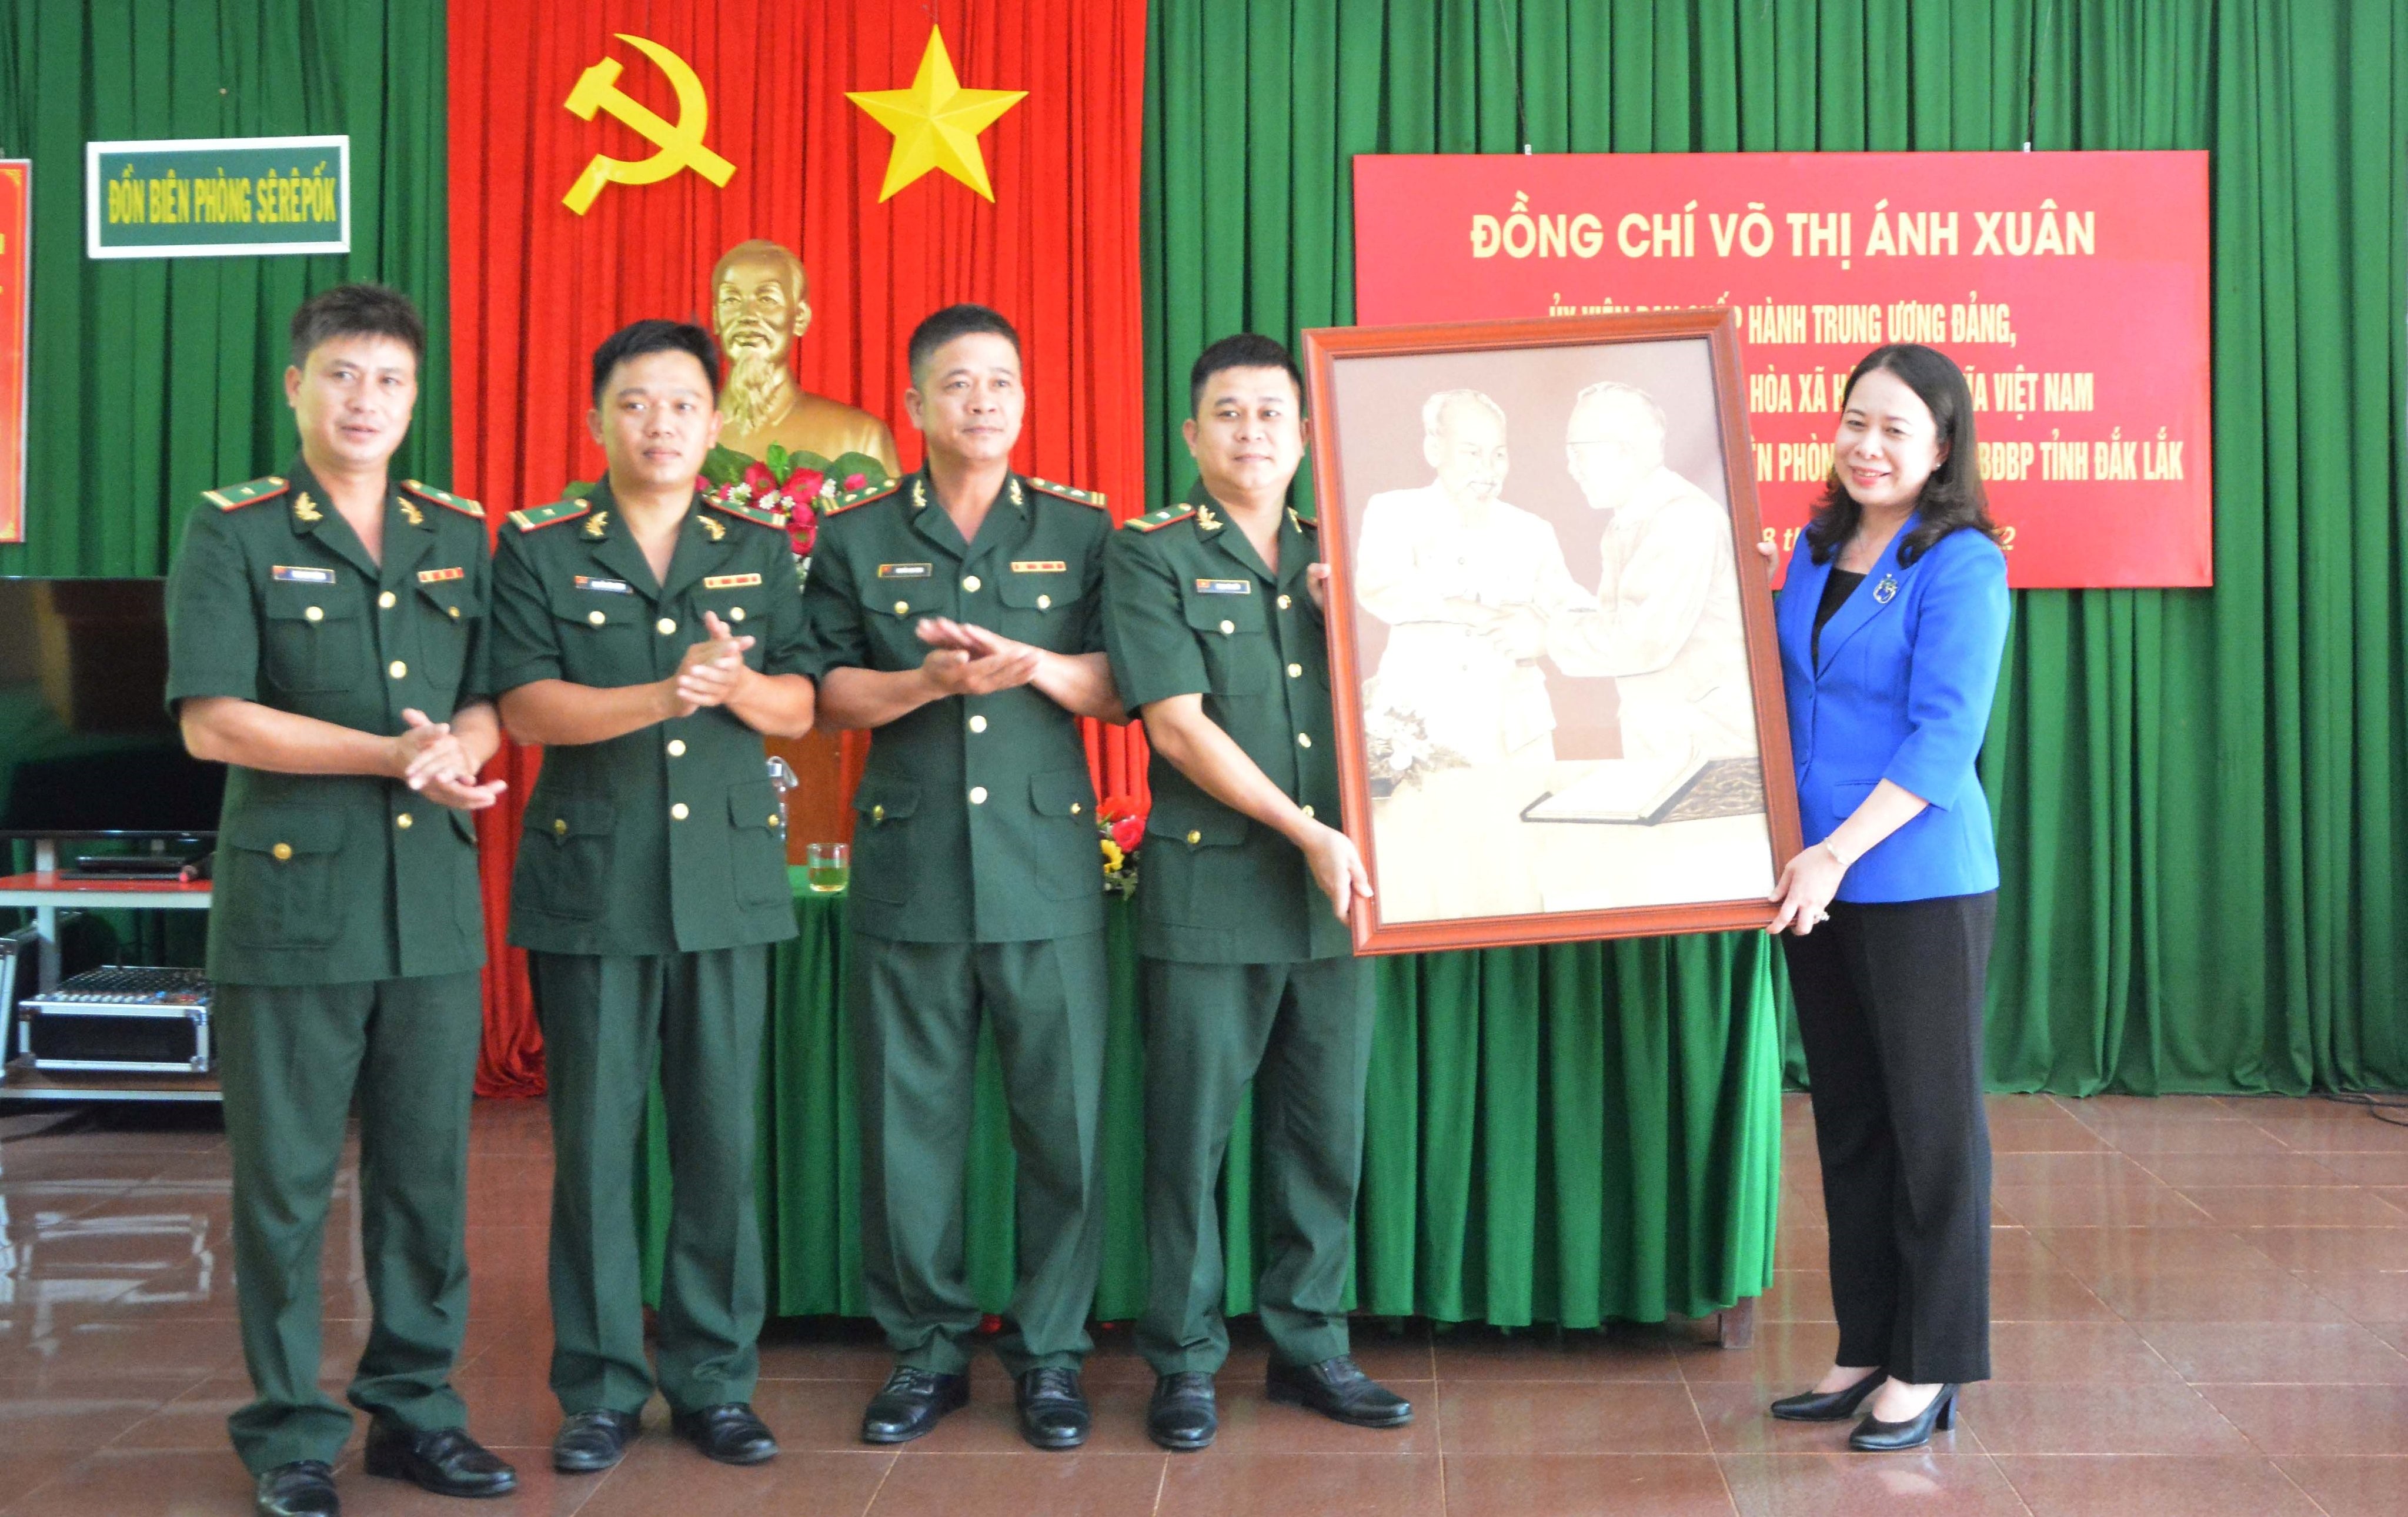 Vice President Vo Thi Anh Xuan works in Dak Lak Province